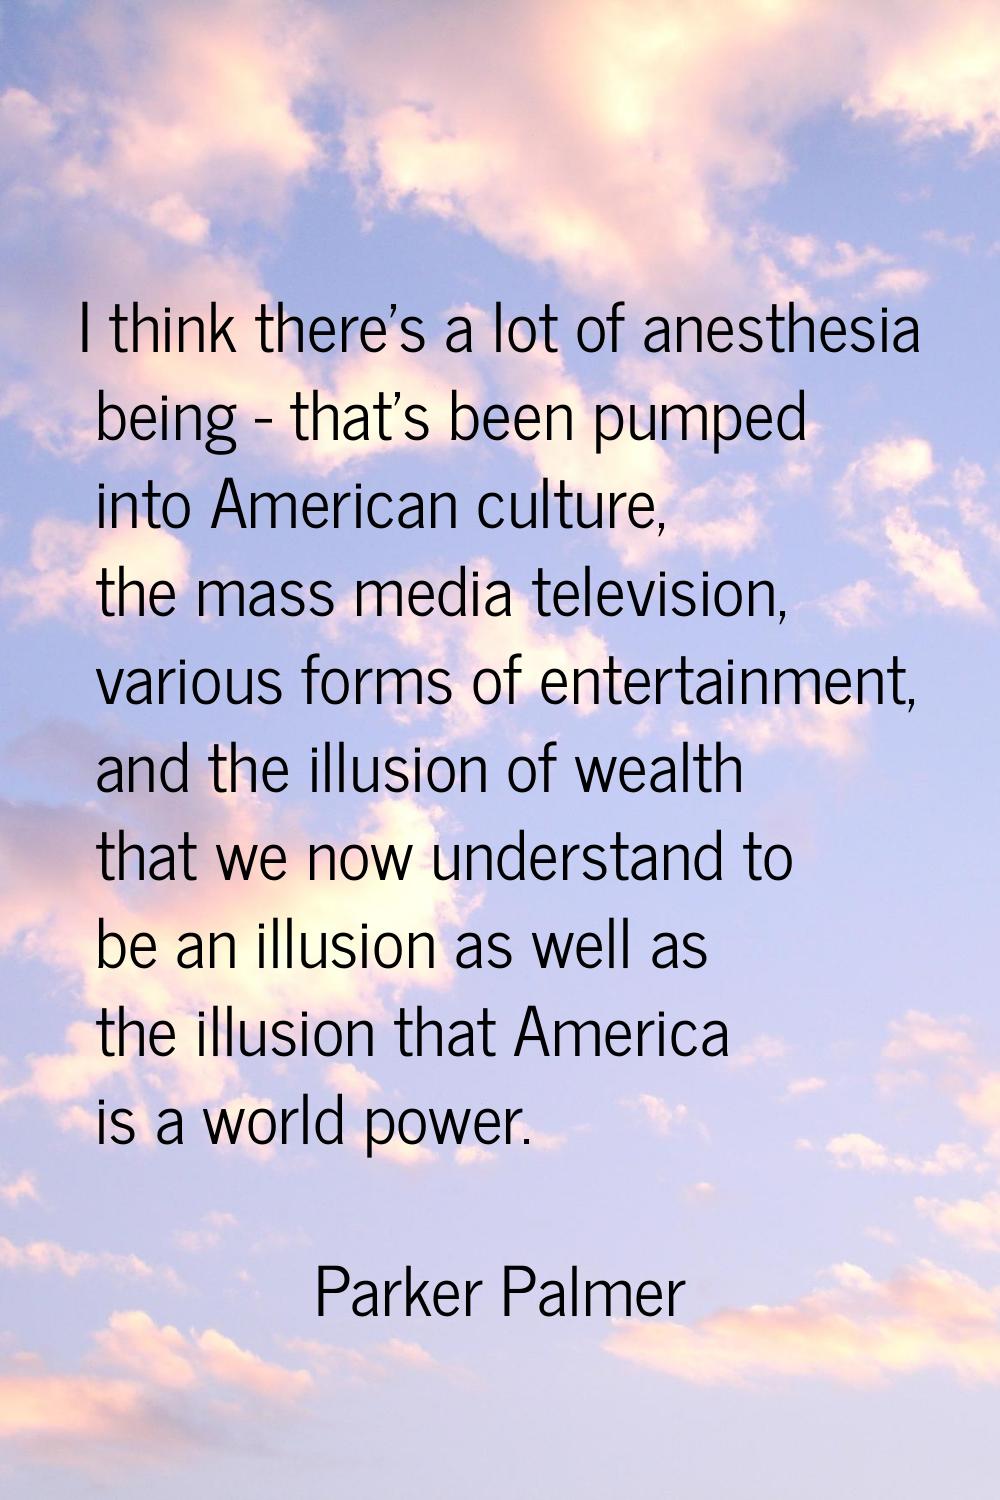 I think there's a lot of anesthesia being - that's been pumped into American culture, the mass medi